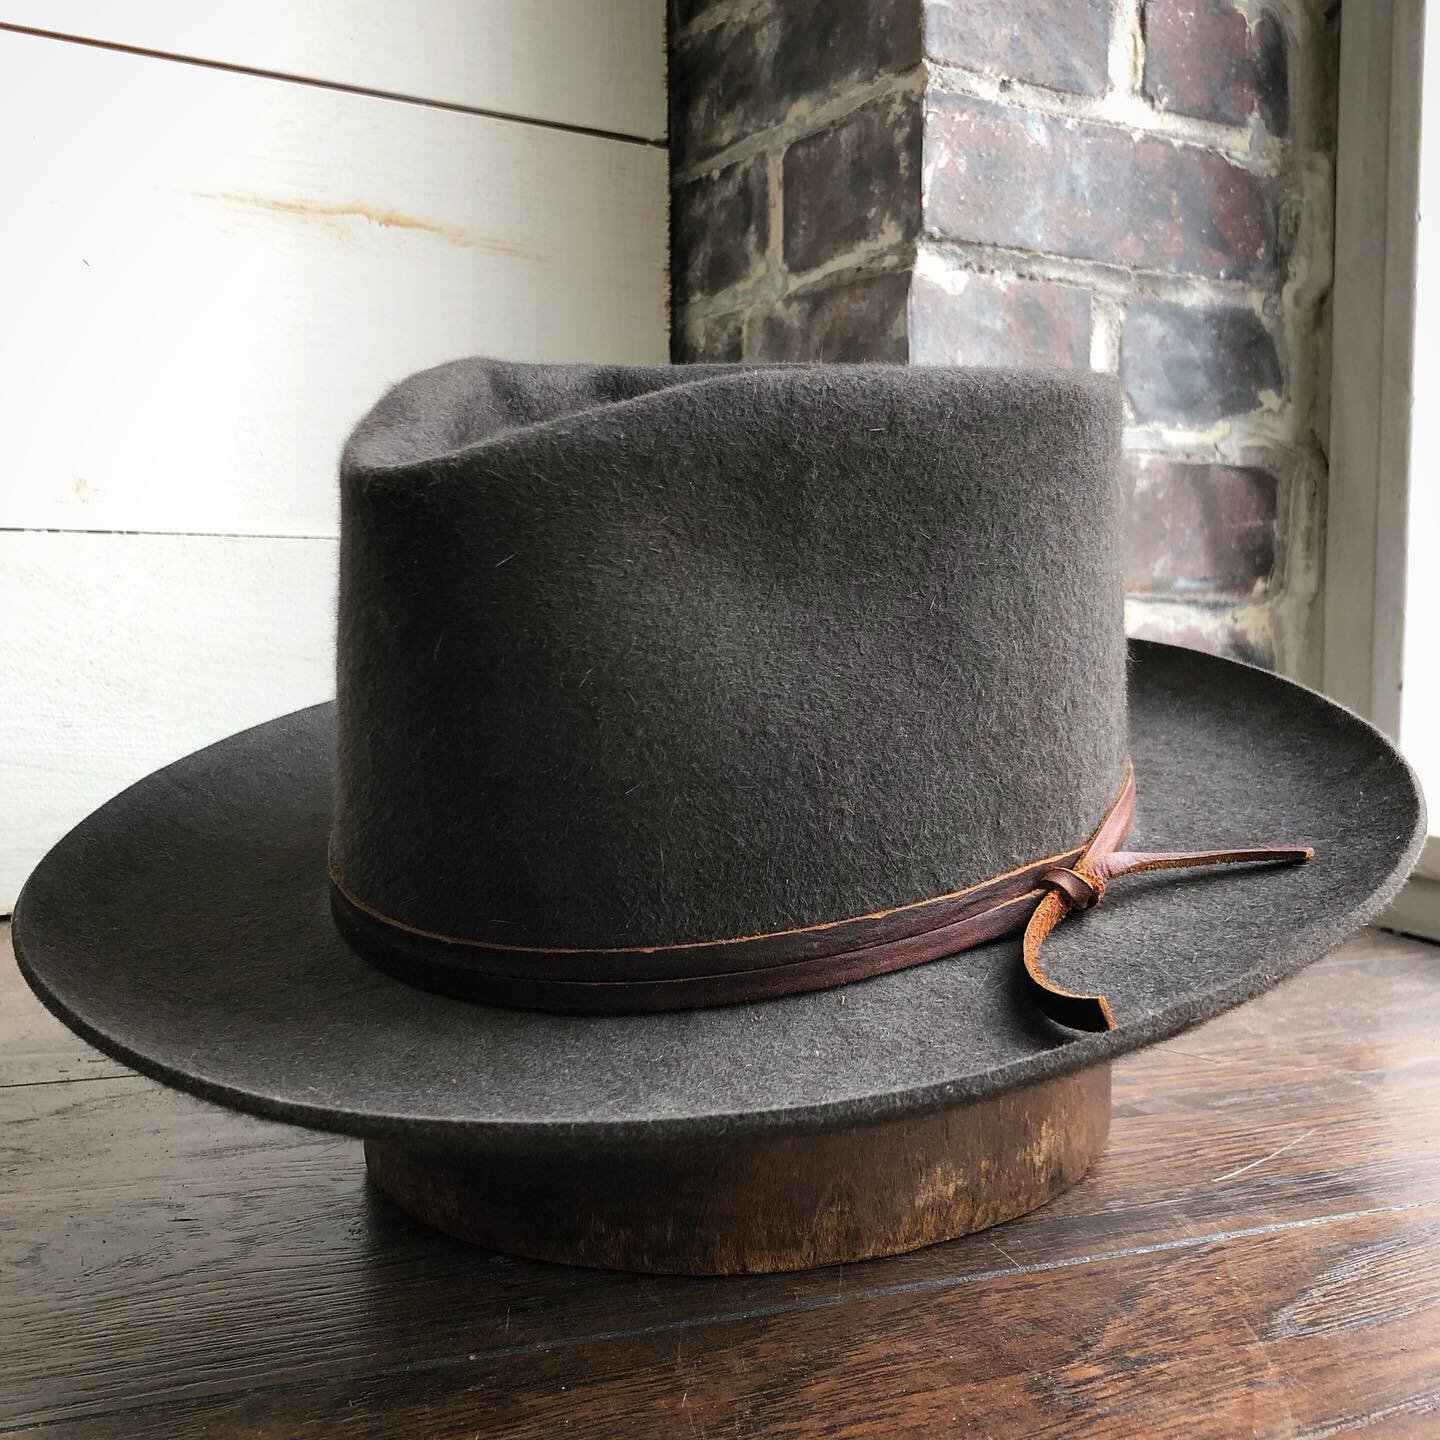  Charcoal, western weight, pure beaver.  Medium-low diamond crown.  2 7/8” flanged brim.  Brown leather outer.   